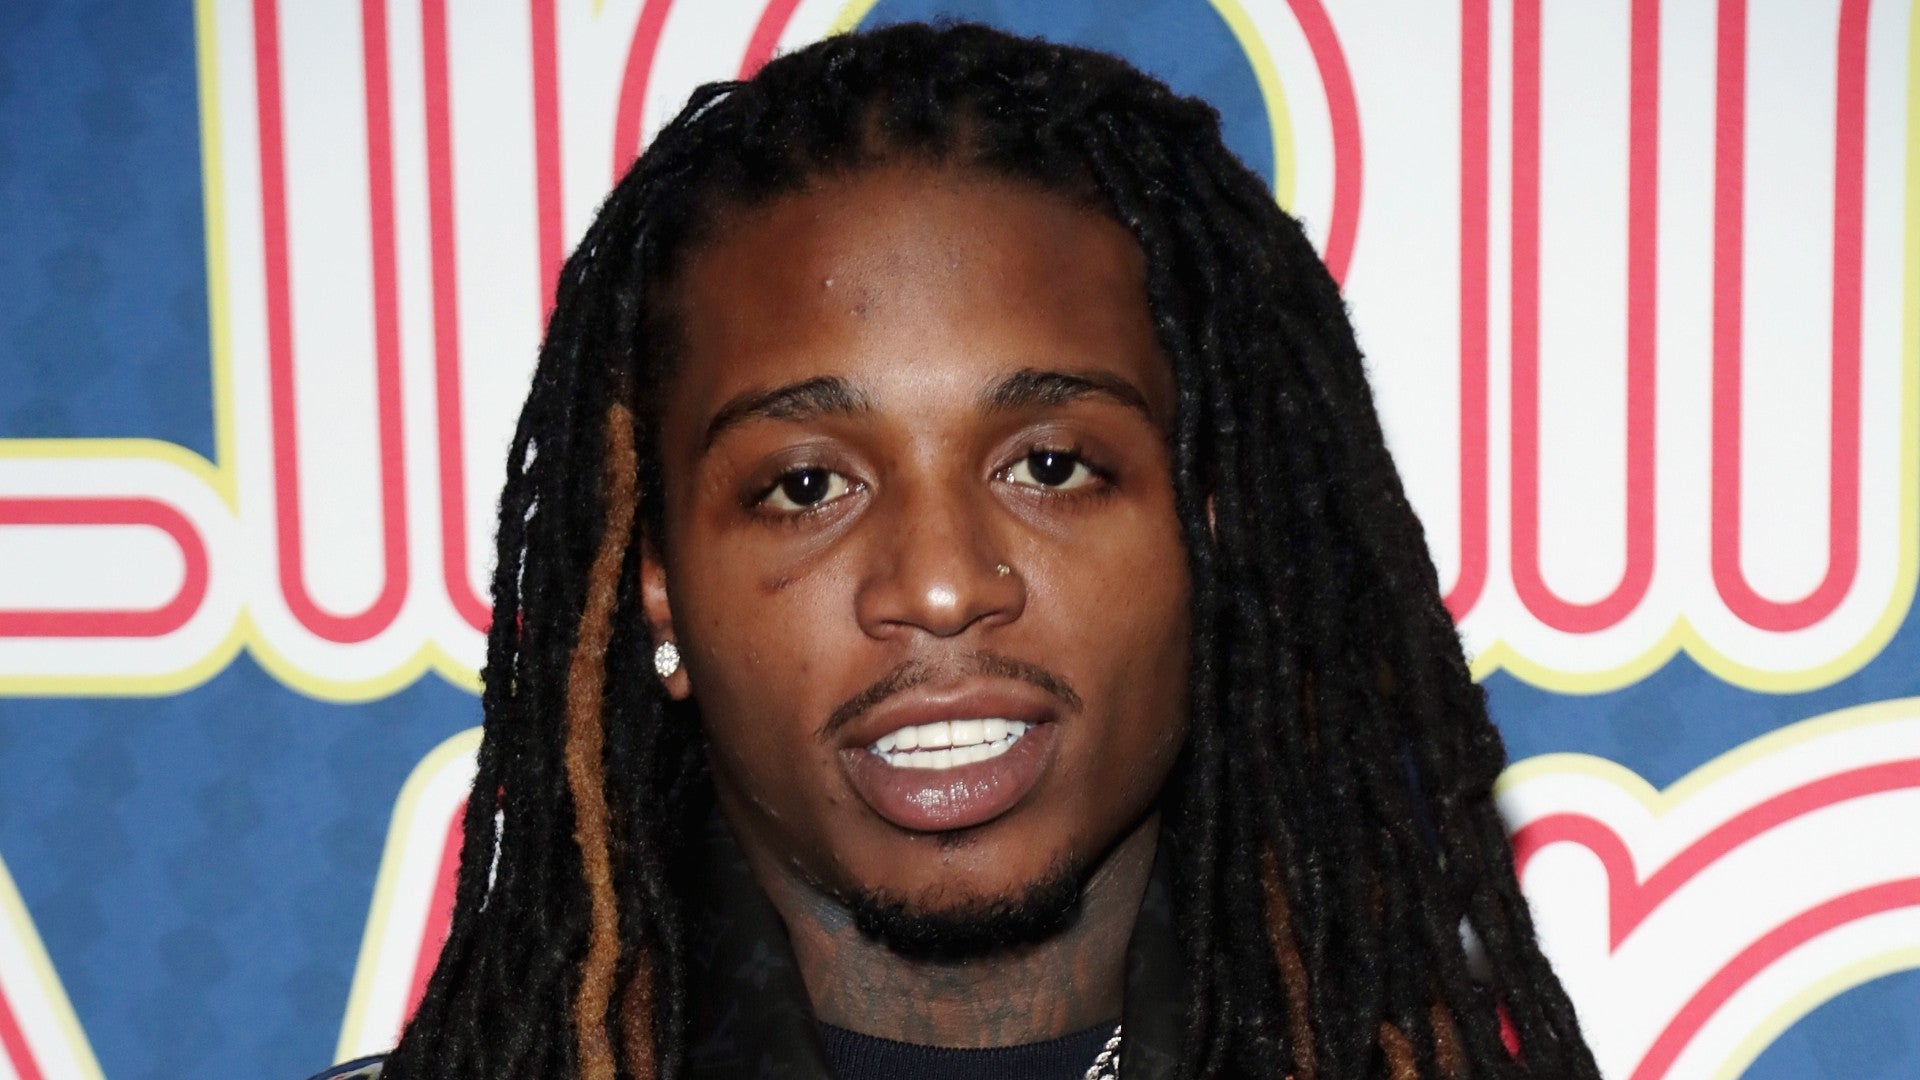 Jacquees's Latest Hairstyle Has Fans In their Feelings